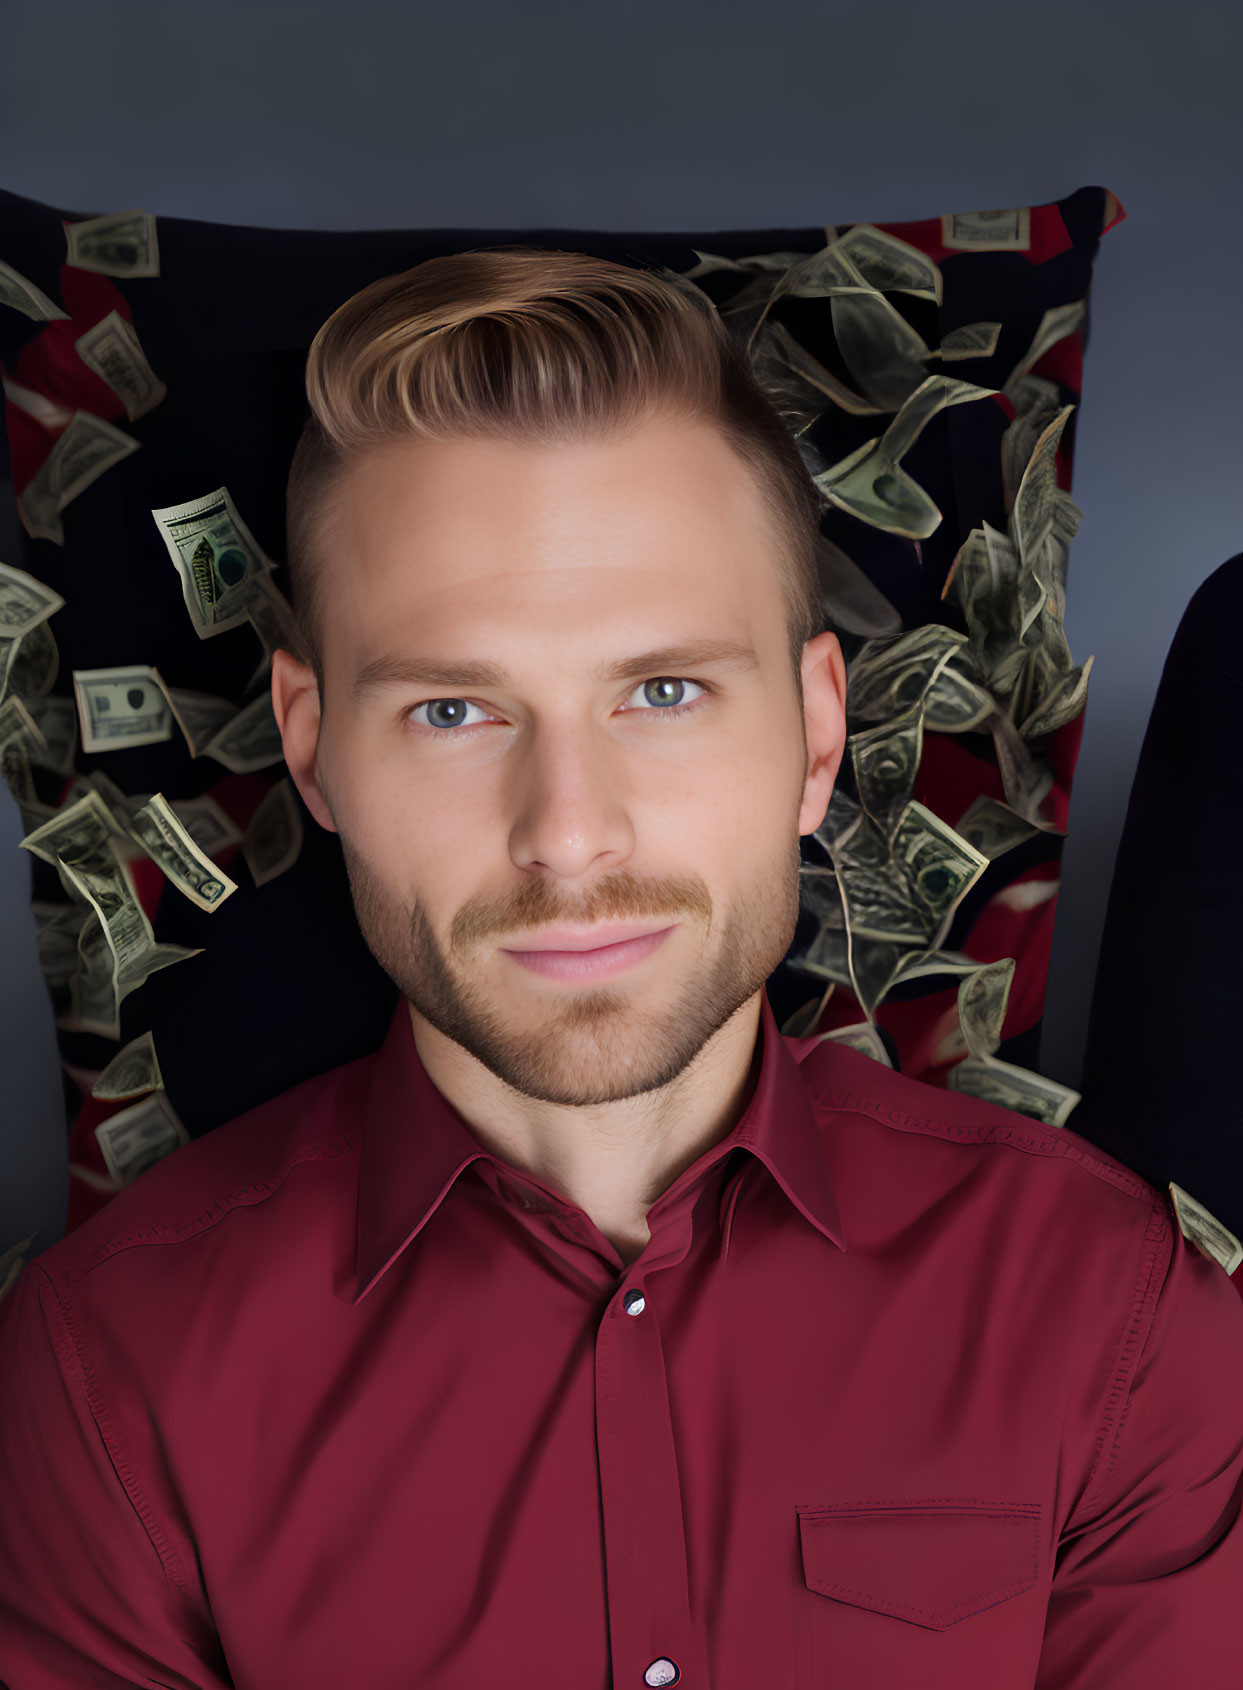 Blond man with beard in red shirt surrounded by flying dollar bills